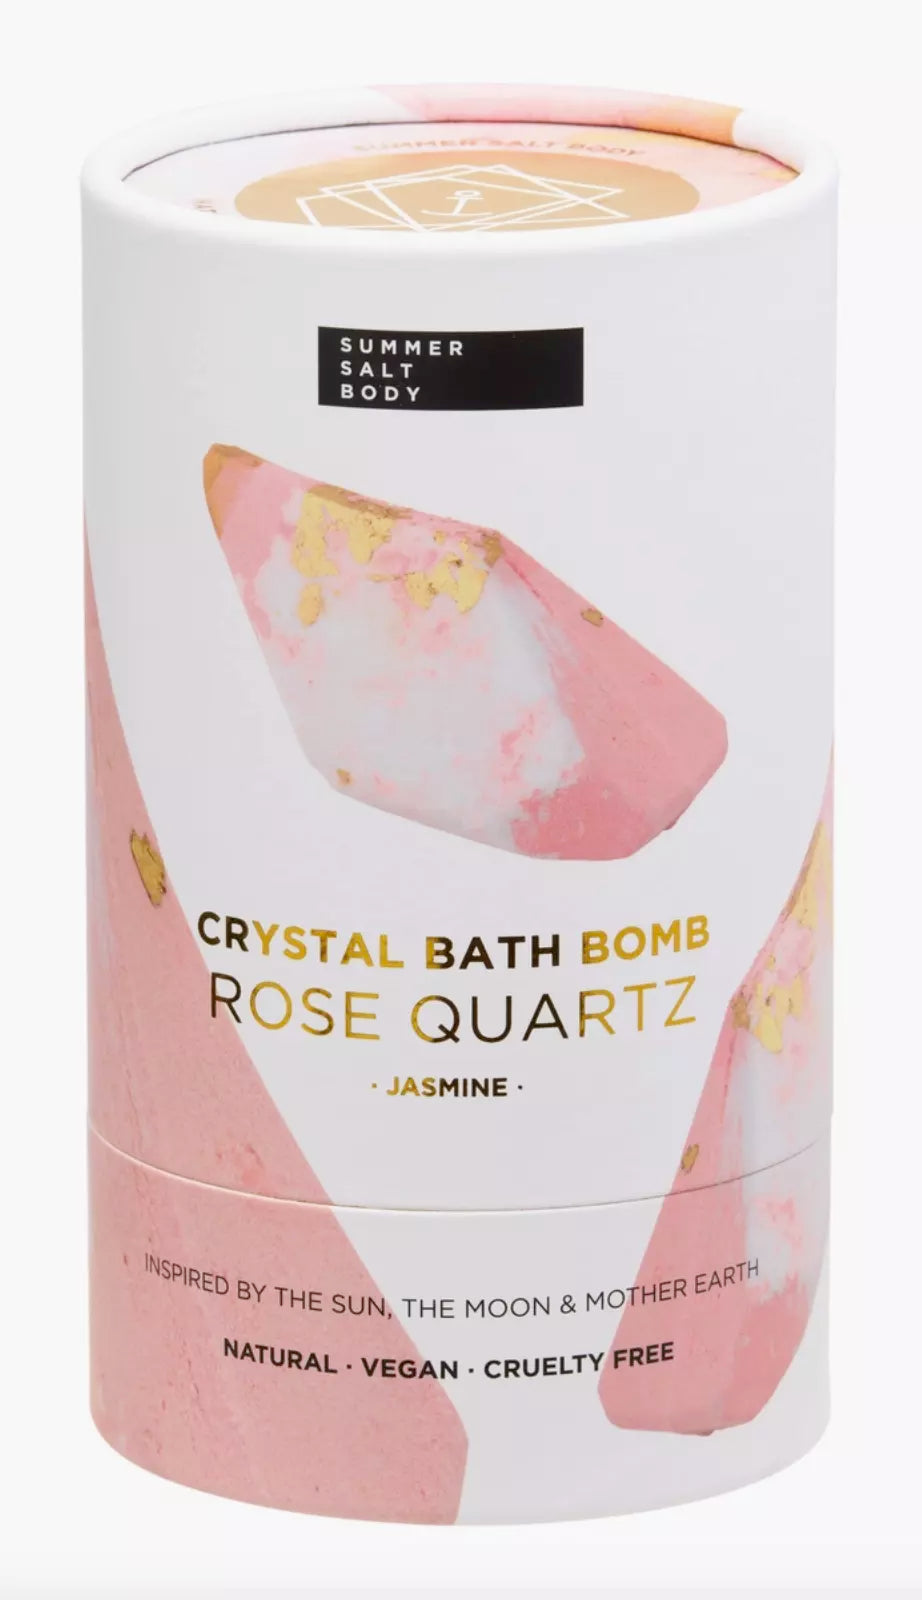 Indulge in an at-home spa treatment with our Crystal Bath Bomb - Rose Quartz - Jasmine infused with the enchanting aroma of Jasmine essential oils from Summer Salt Body.